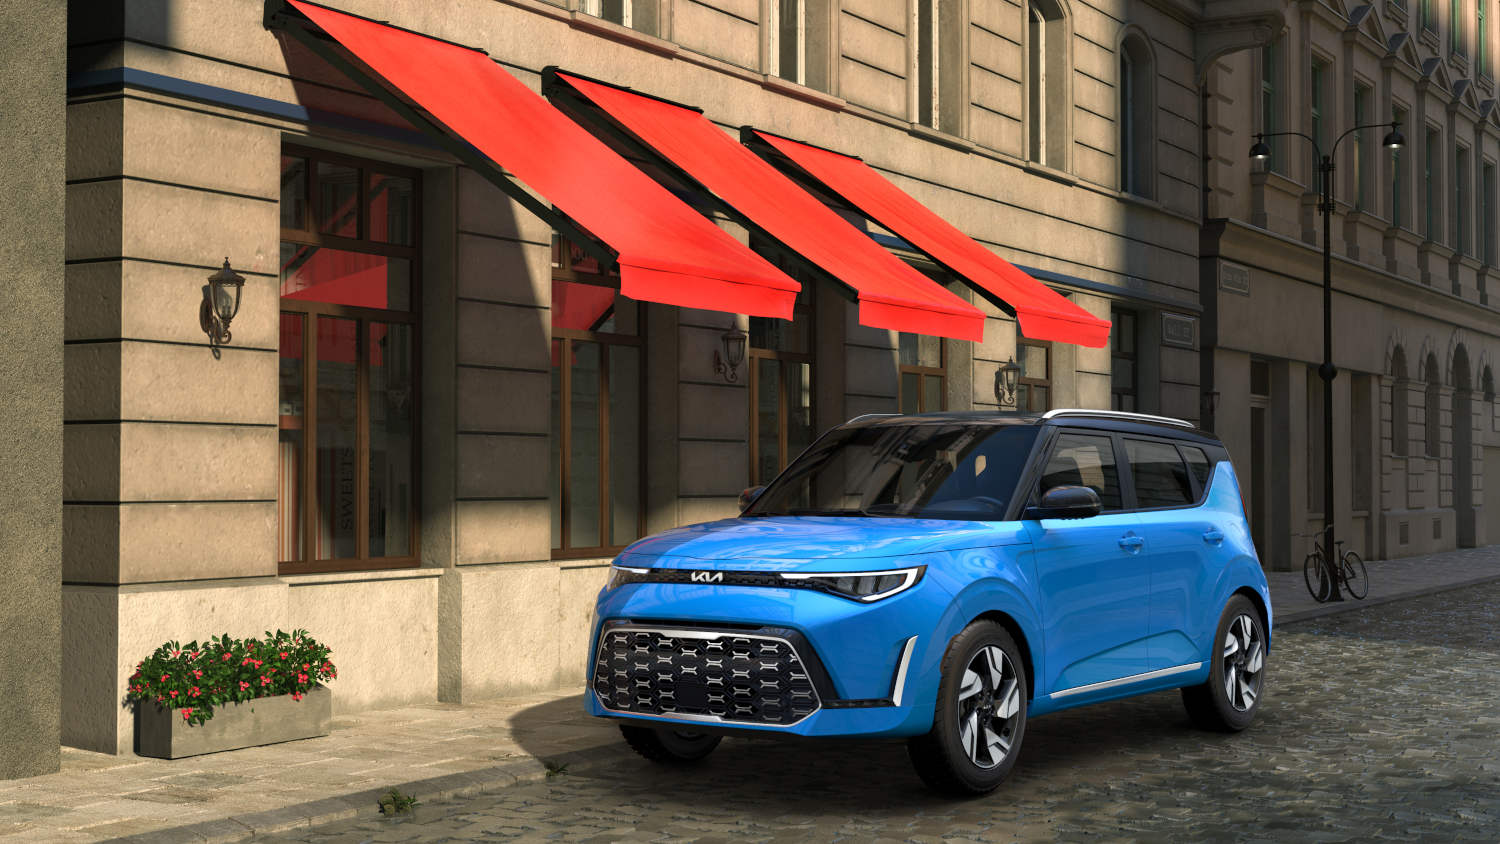 The best small SUVs of 2023 include this Kia Soul